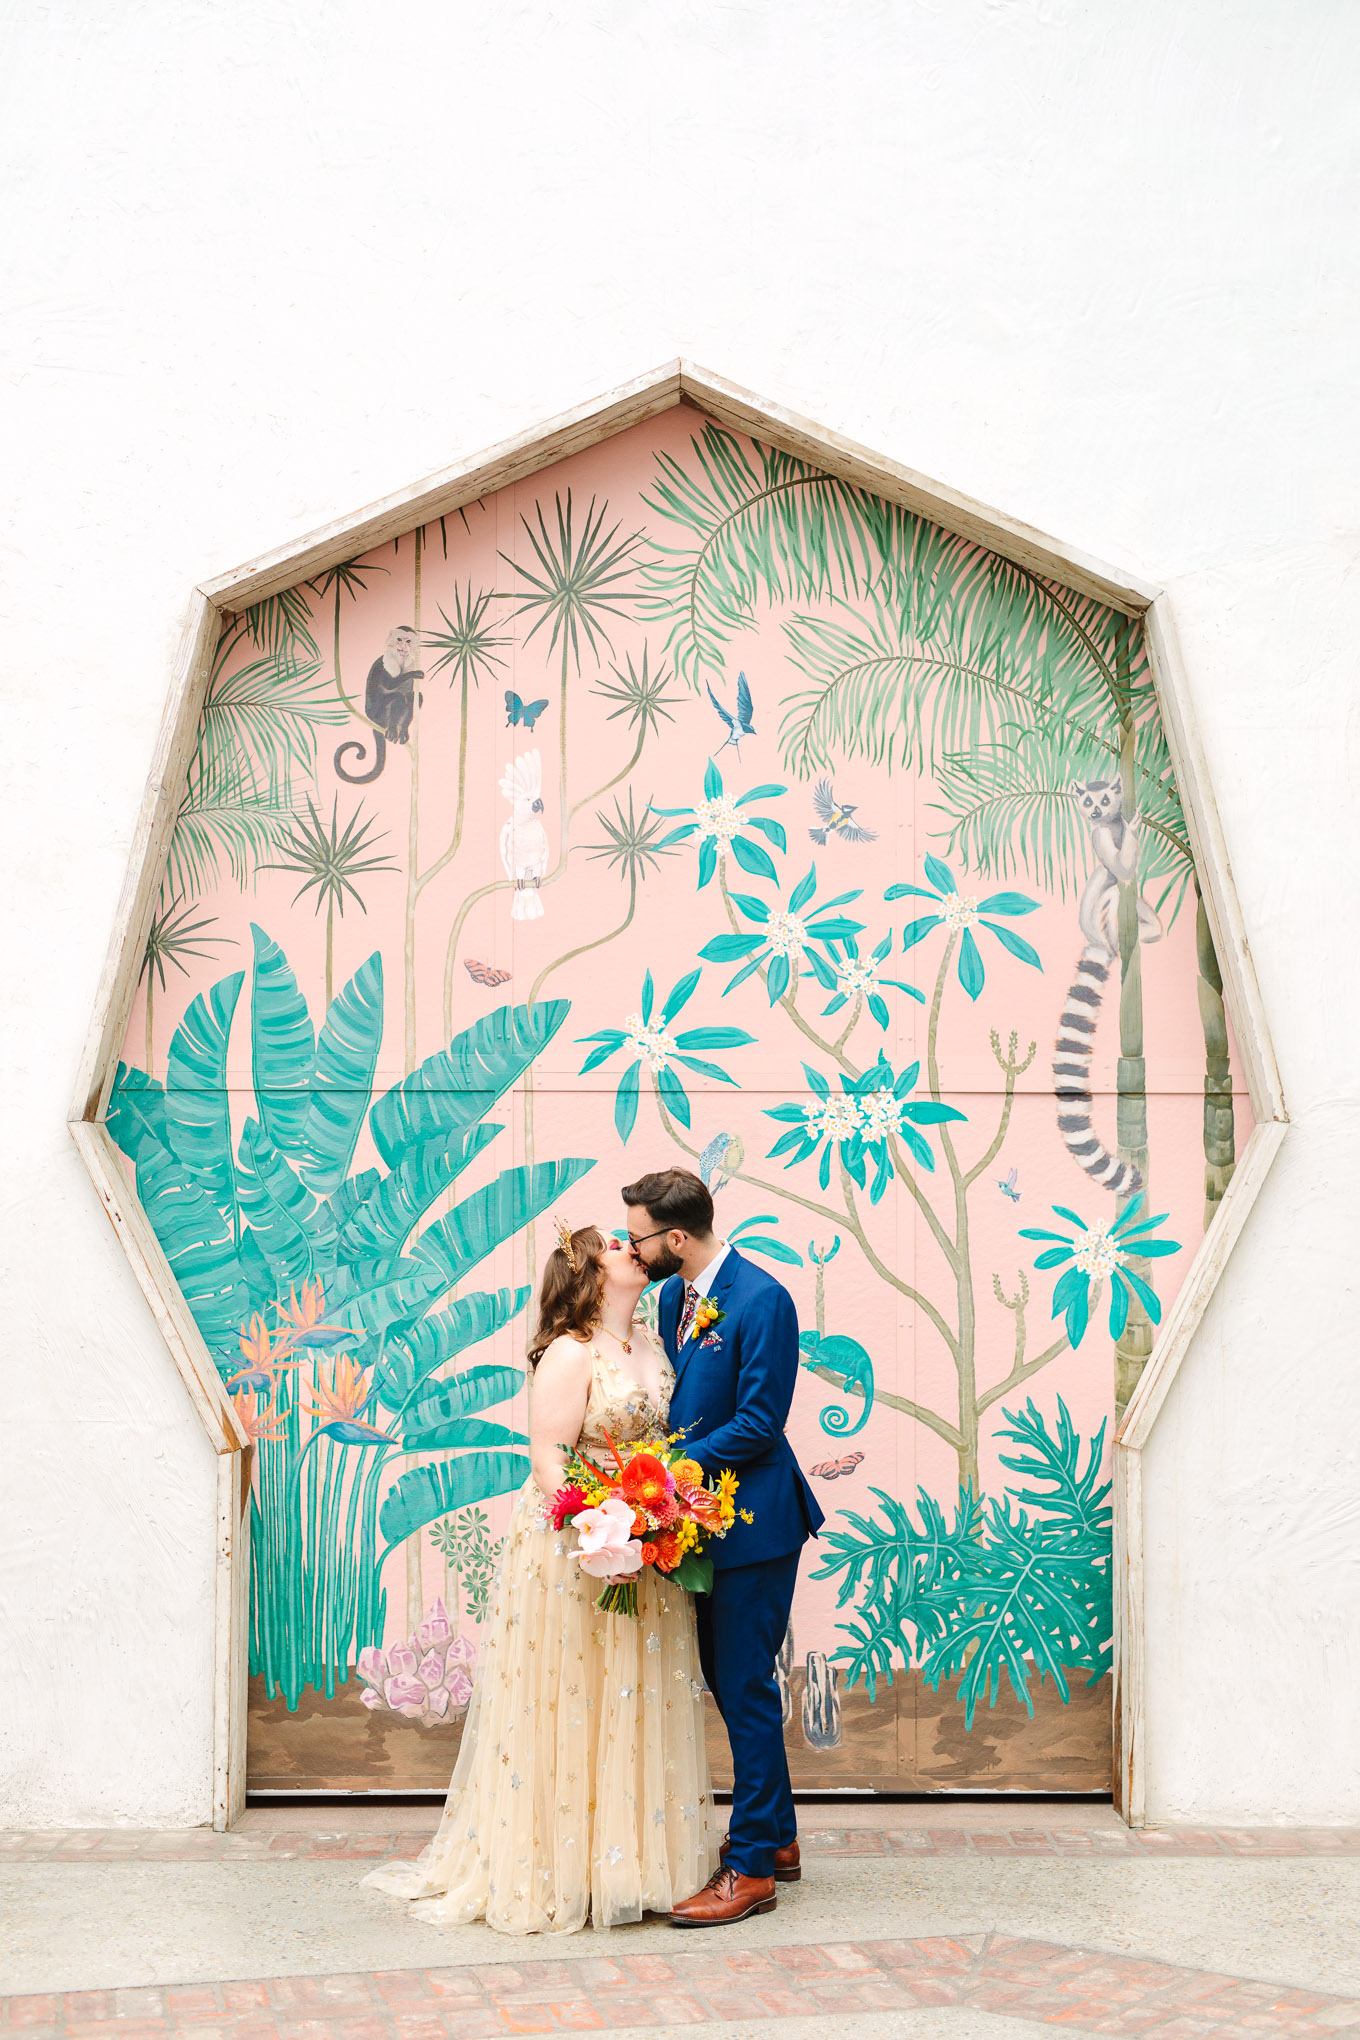 Bride and groom kissing at mural | Colorful Downtown Los Angeles Valentine Wedding | Los Angeles wedding photographer | #losangeleswedding #colorfulwedding #DTLA #valentinedtla   Source: Mary Costa Photography | Los Angeles